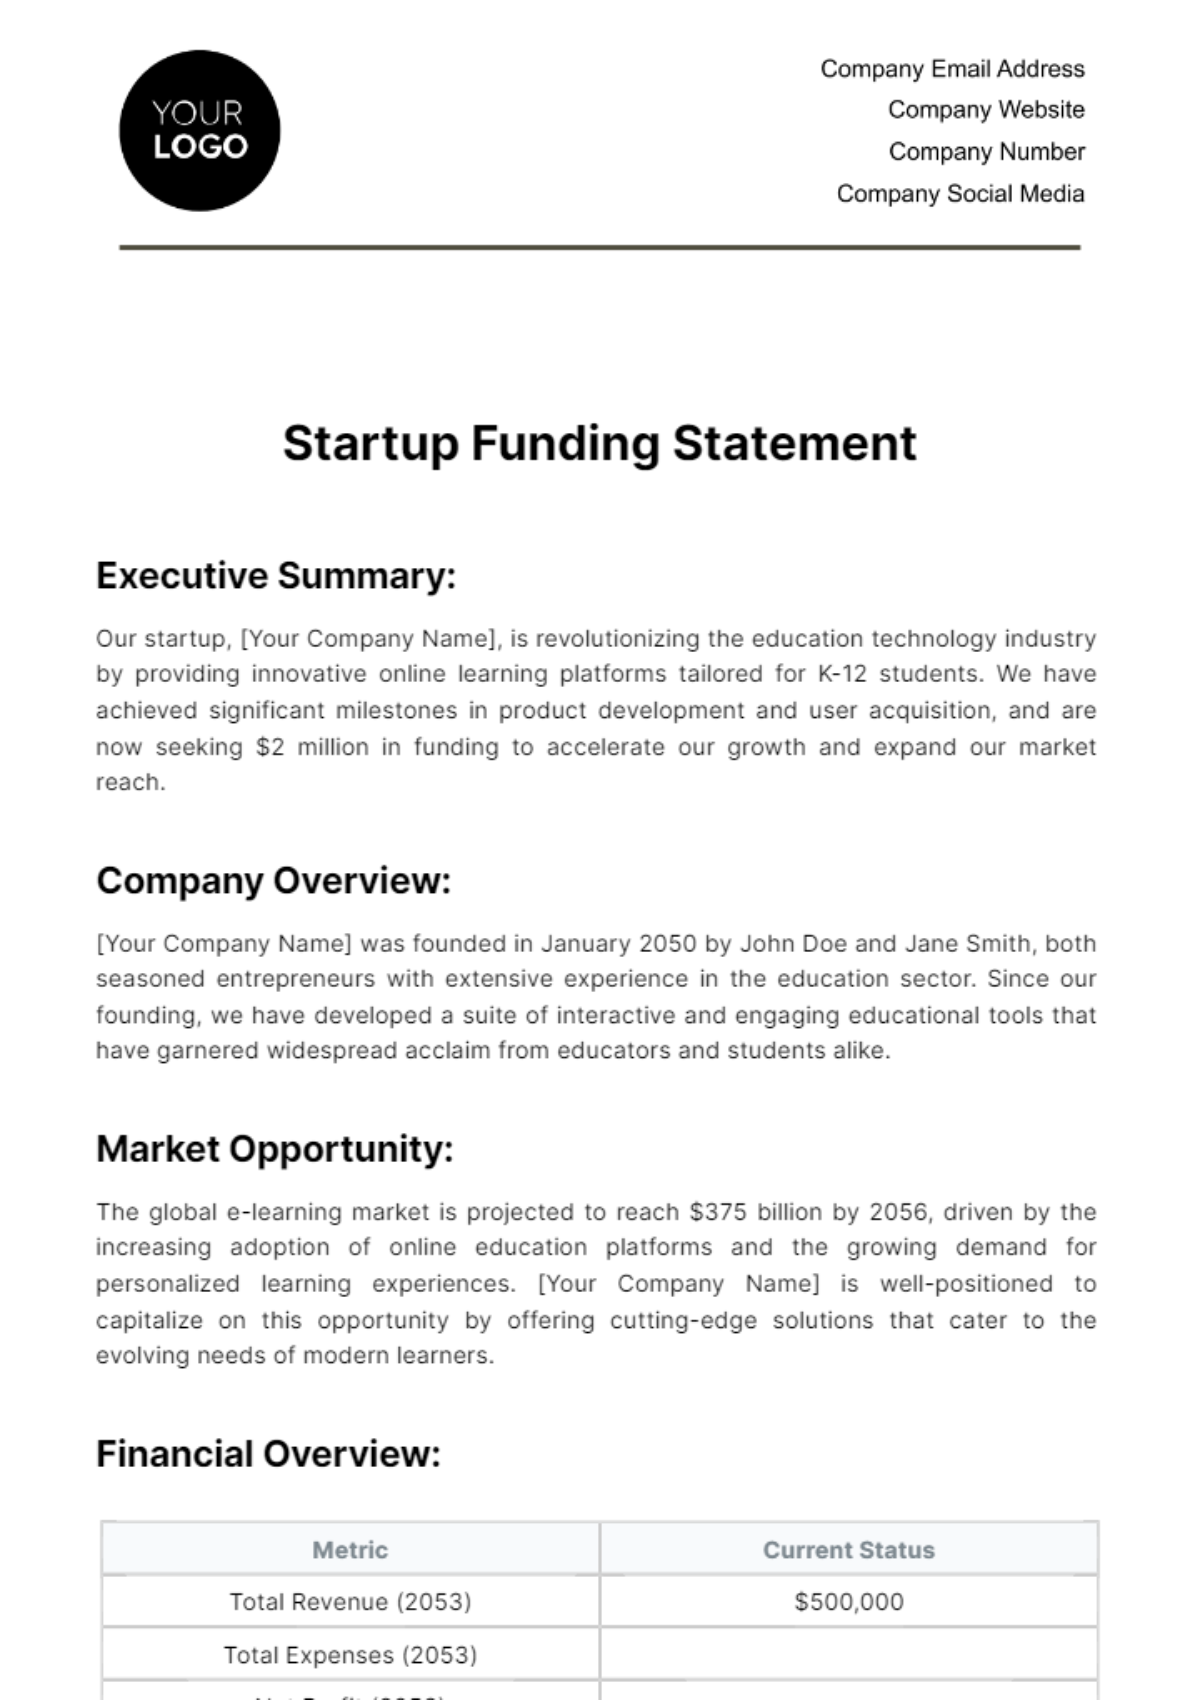 Startup Funding Statement Template